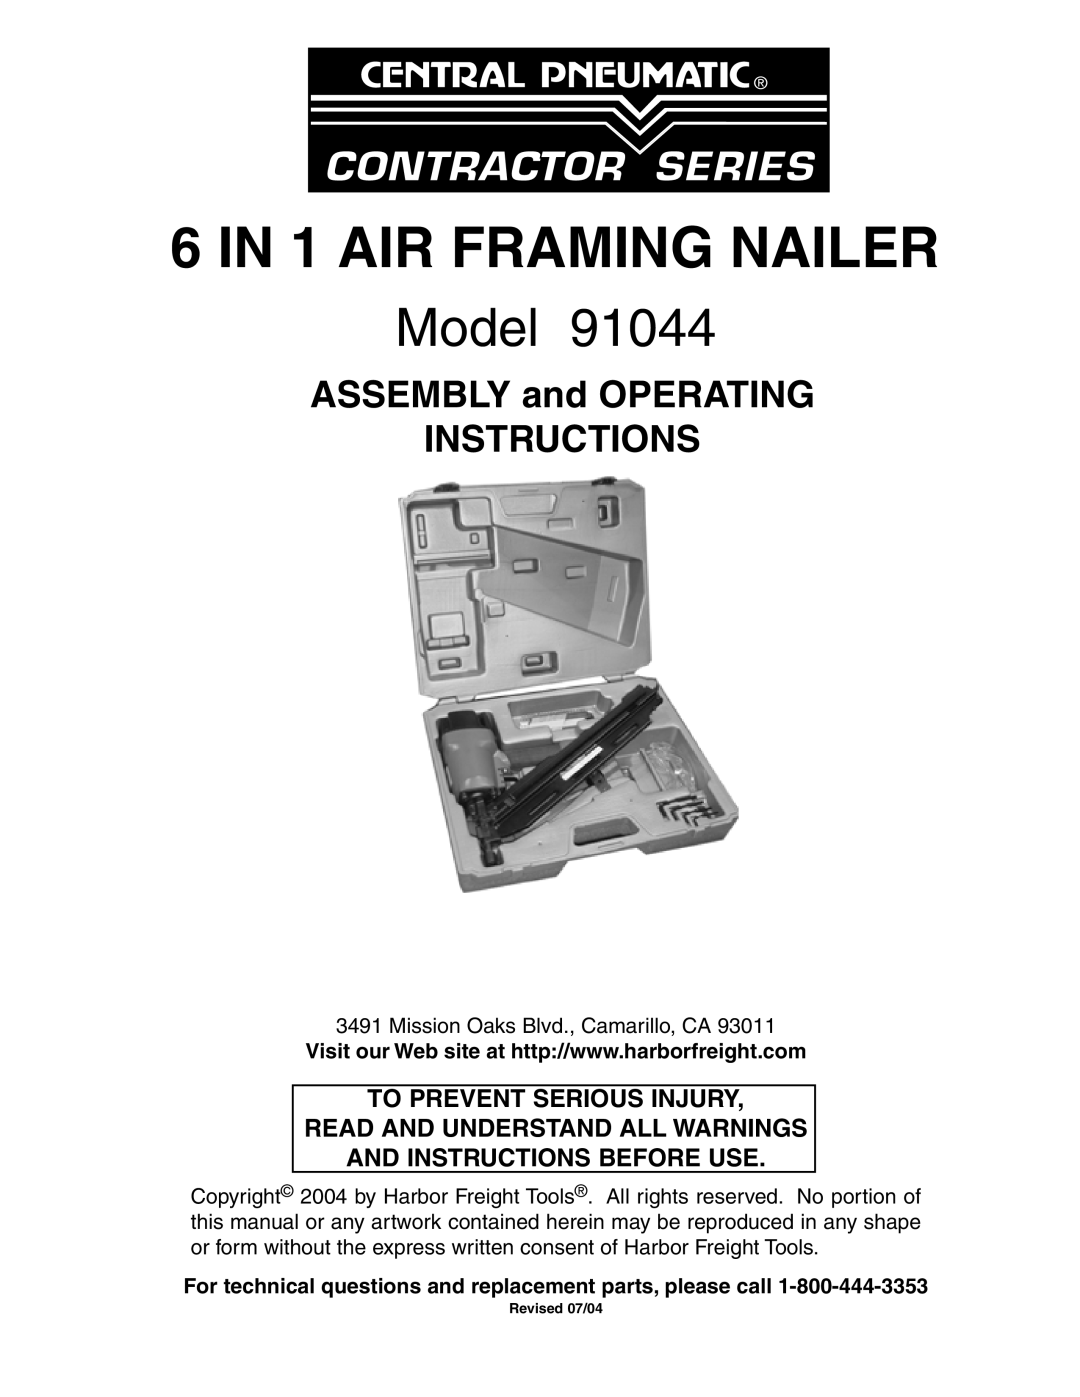 Harbor Freight Tools 91044 operating instructions To Prevent Serious Injury Read And Understand All Warnings, Model 